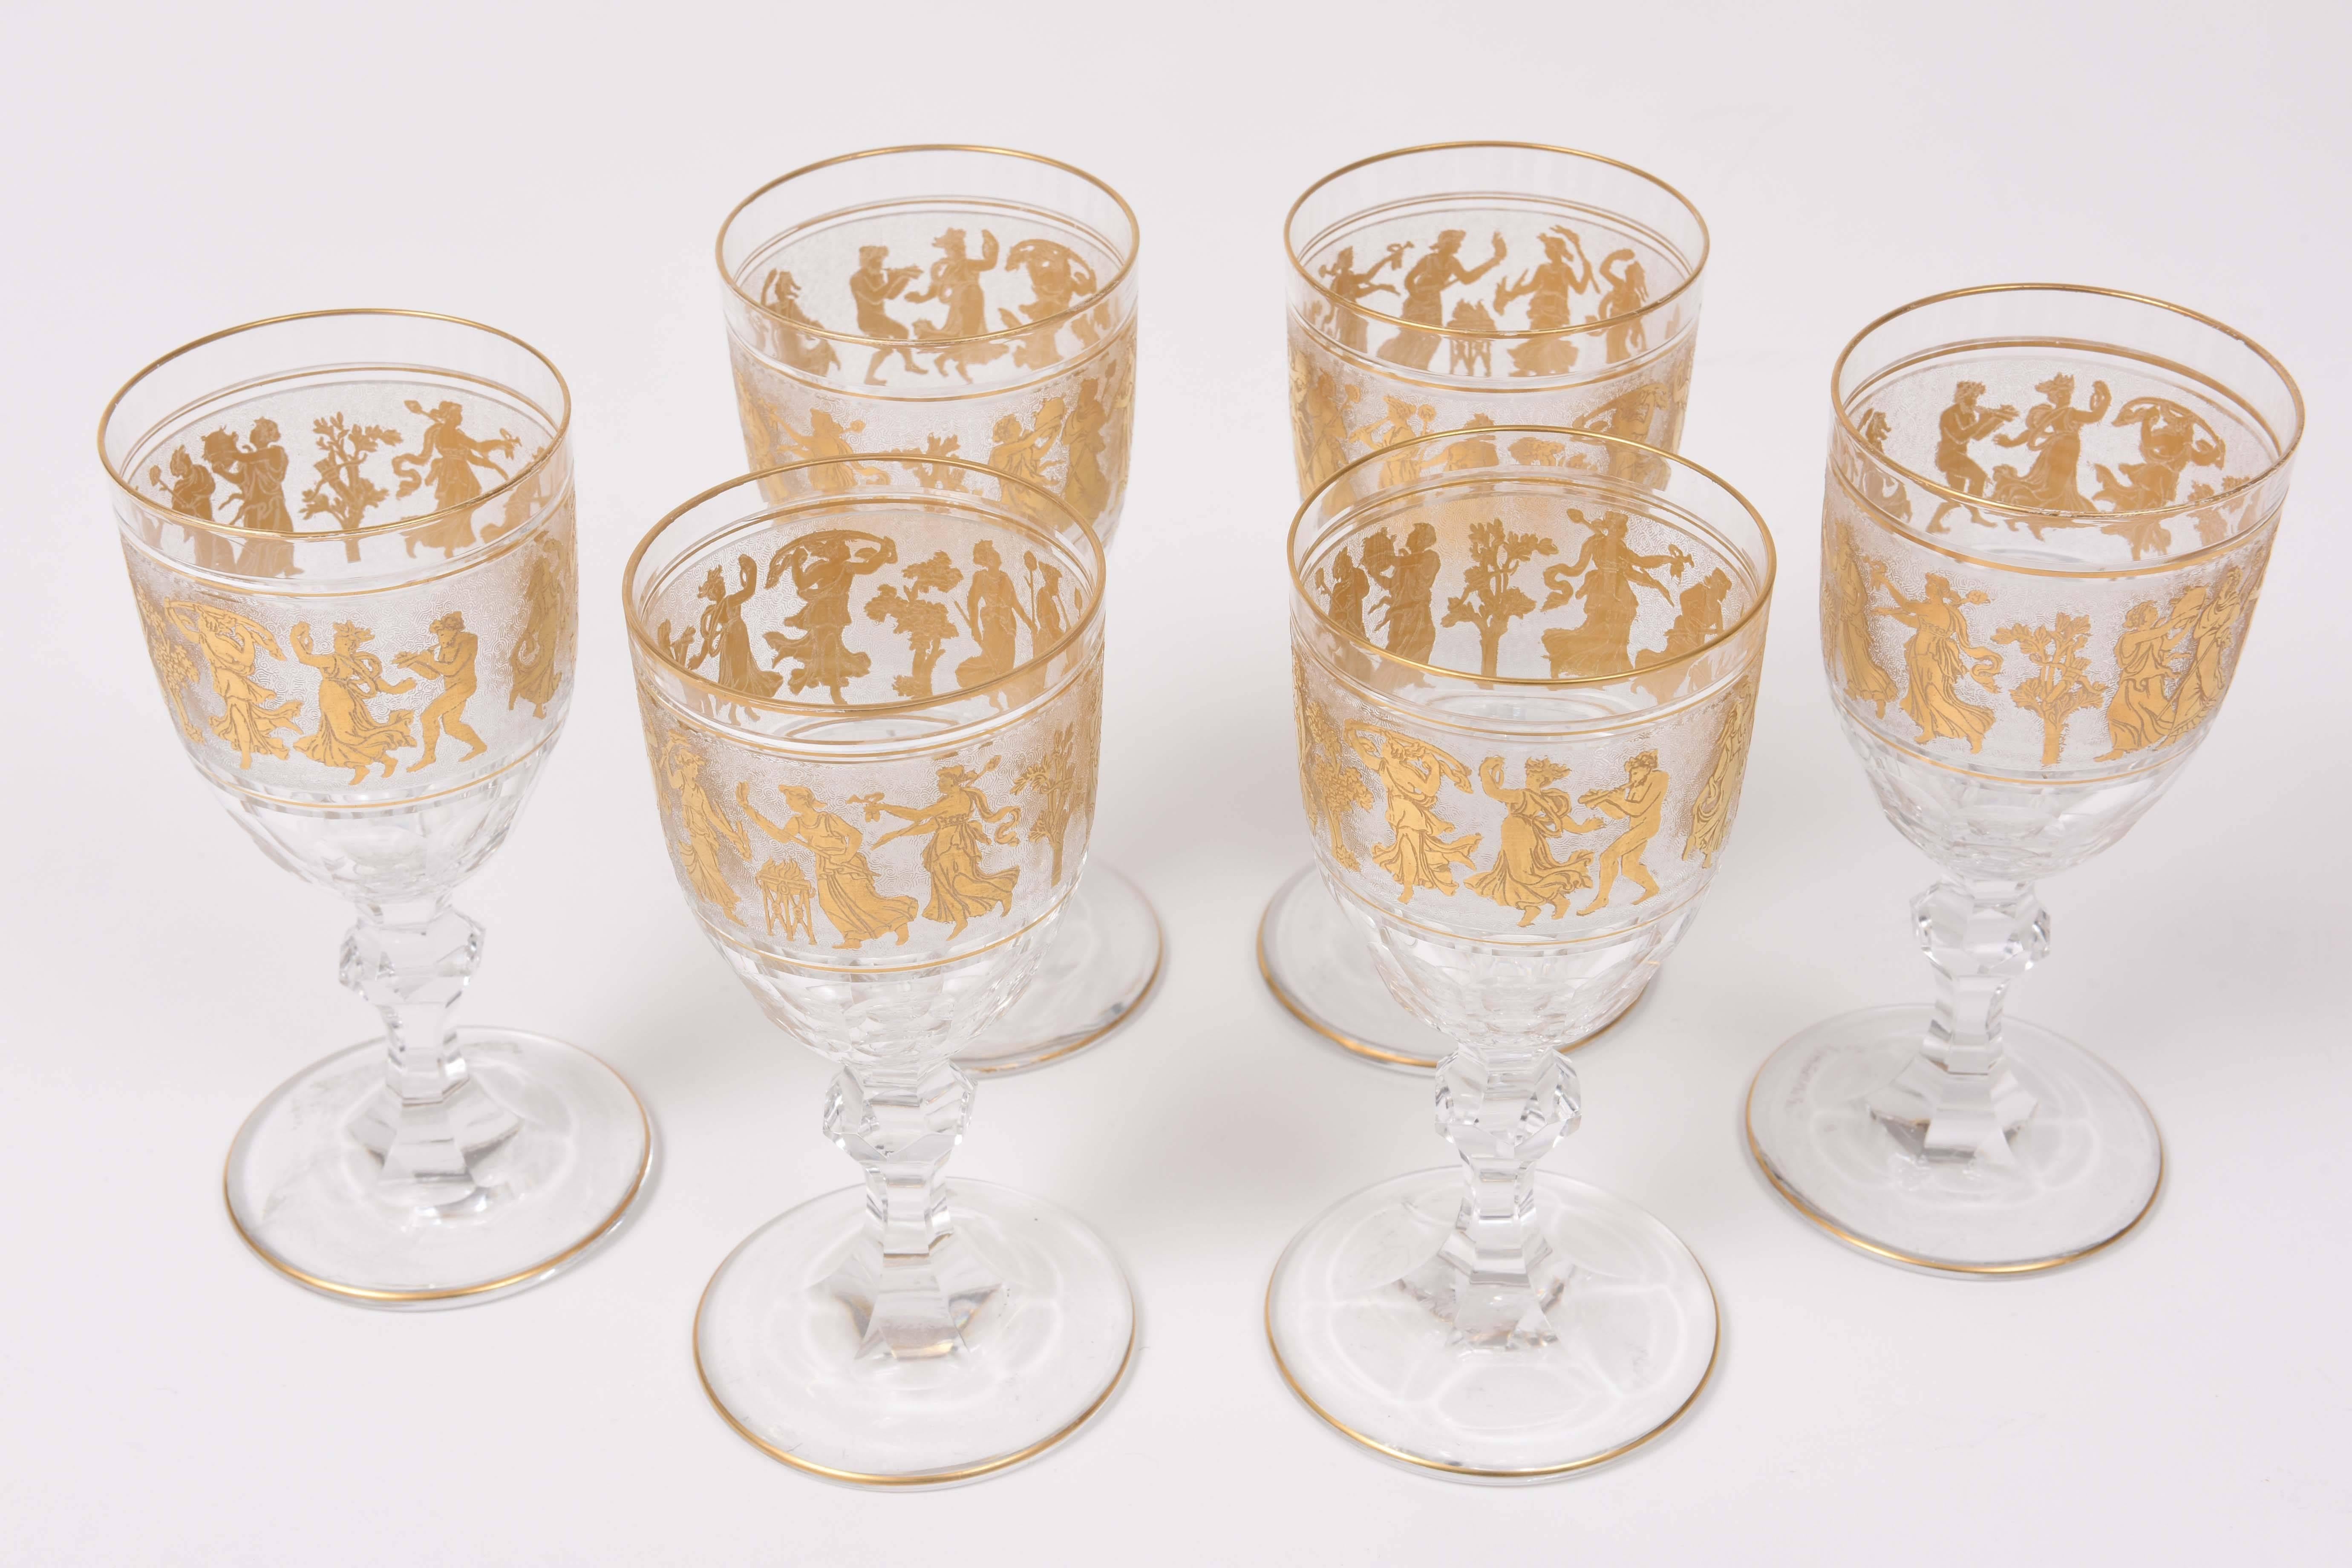 One of this storied firms Classic and beloved patterns, known affectionately as Danse. A heavy blown cut glass goblet with dancing figures surround on an acid etched background. Trimmed on top and base with 24-karat gold with a nicely proportioned